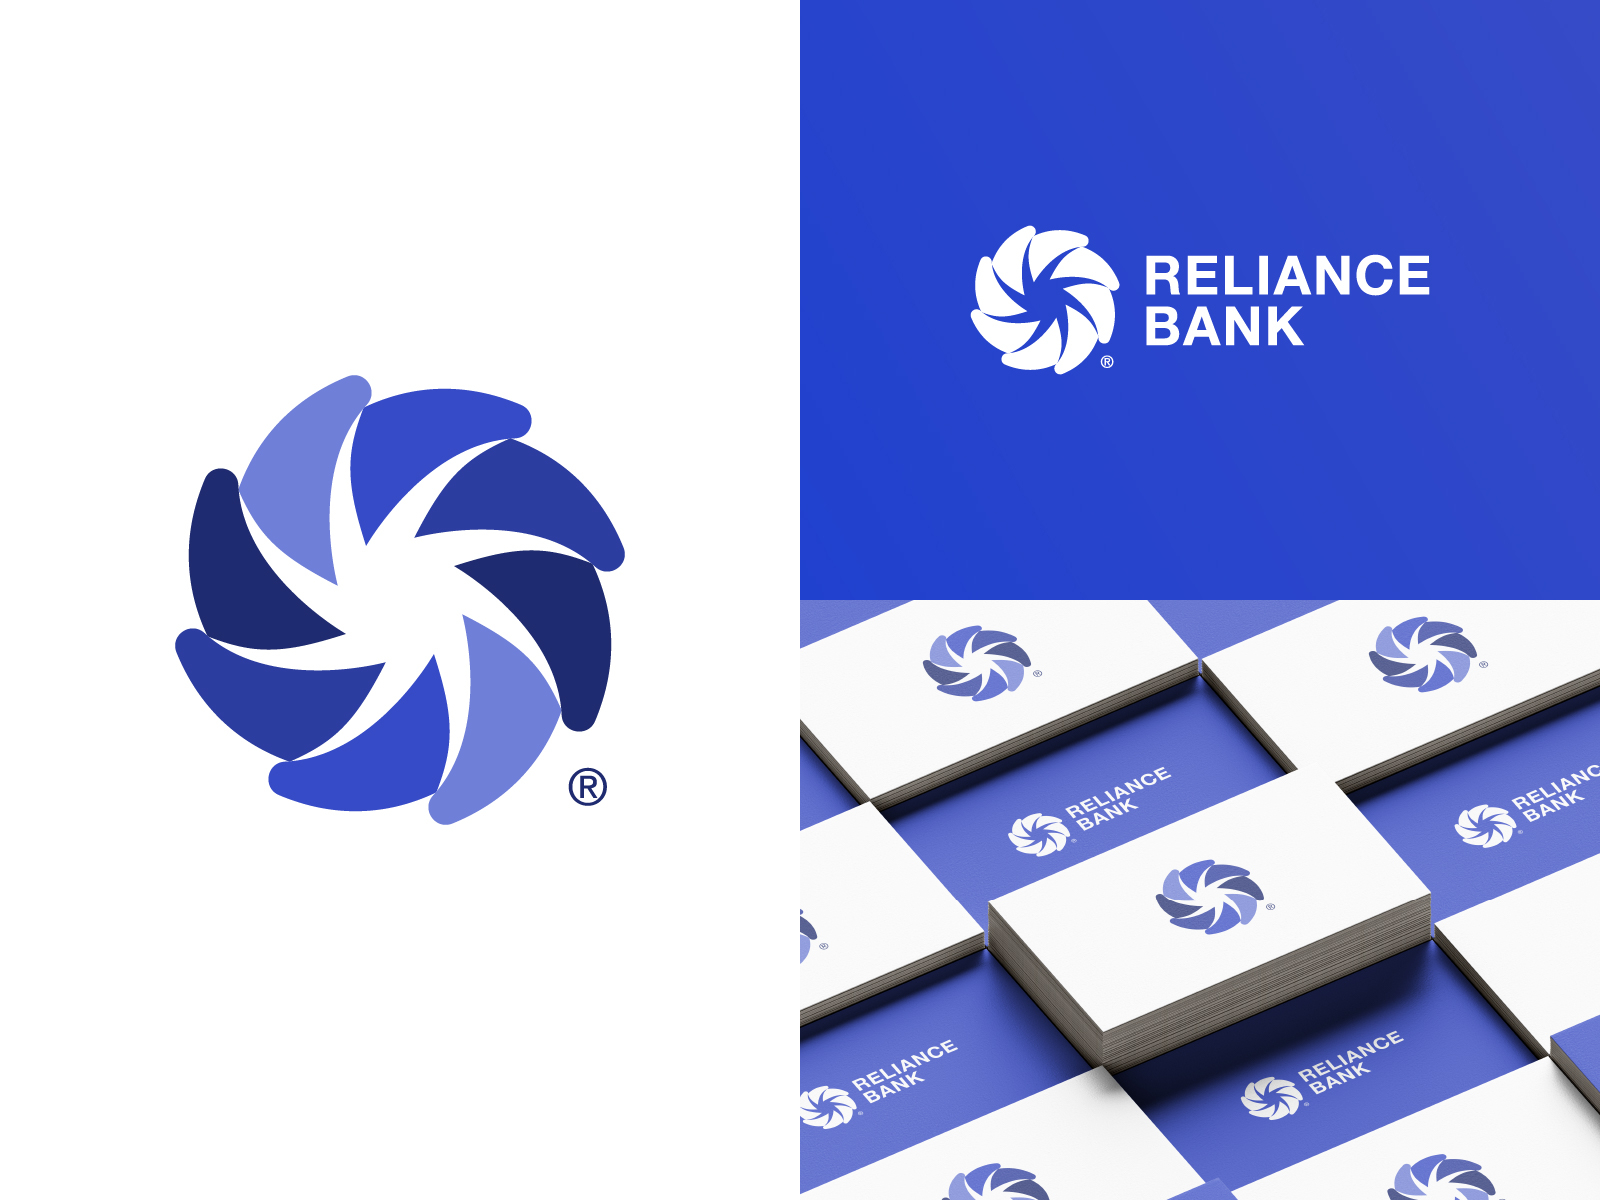 reliance logo wallpapers